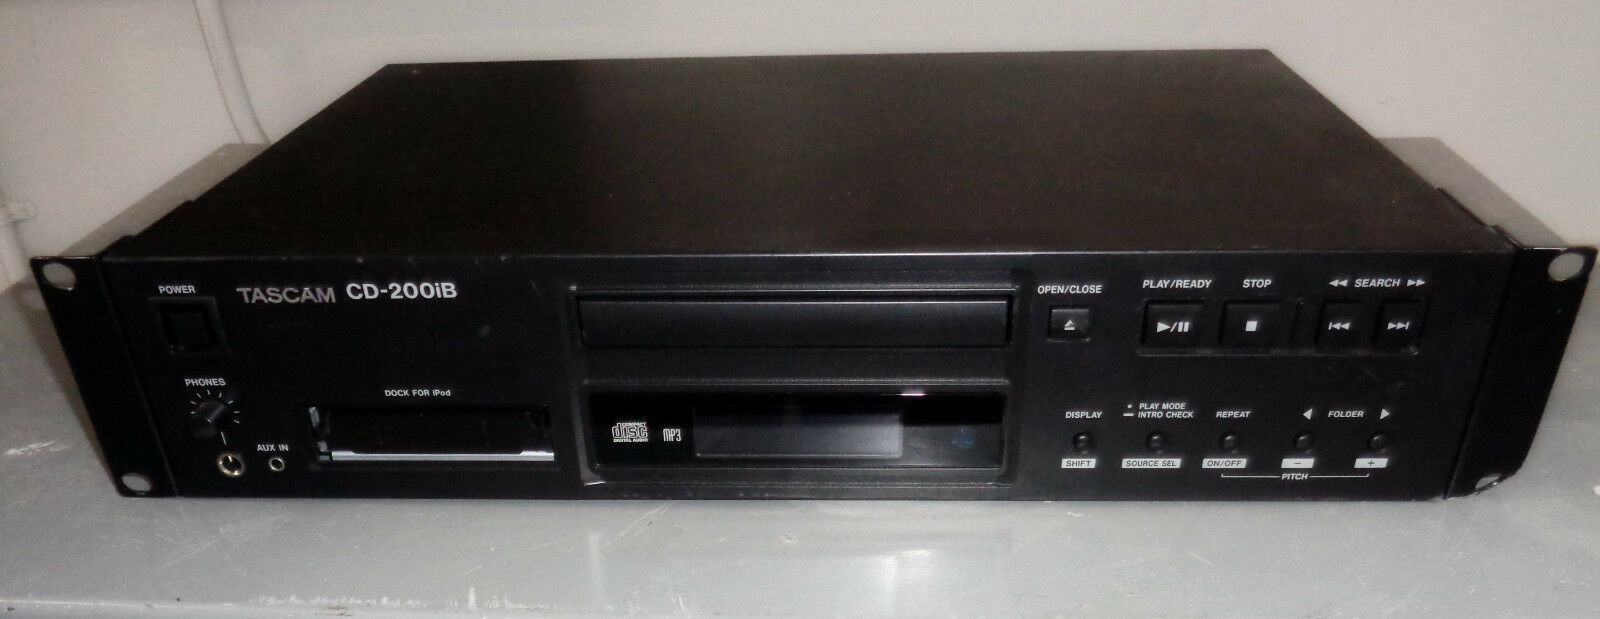 AS IS Tascam CD-200iB CD Player for Parts FREE SHIPPING